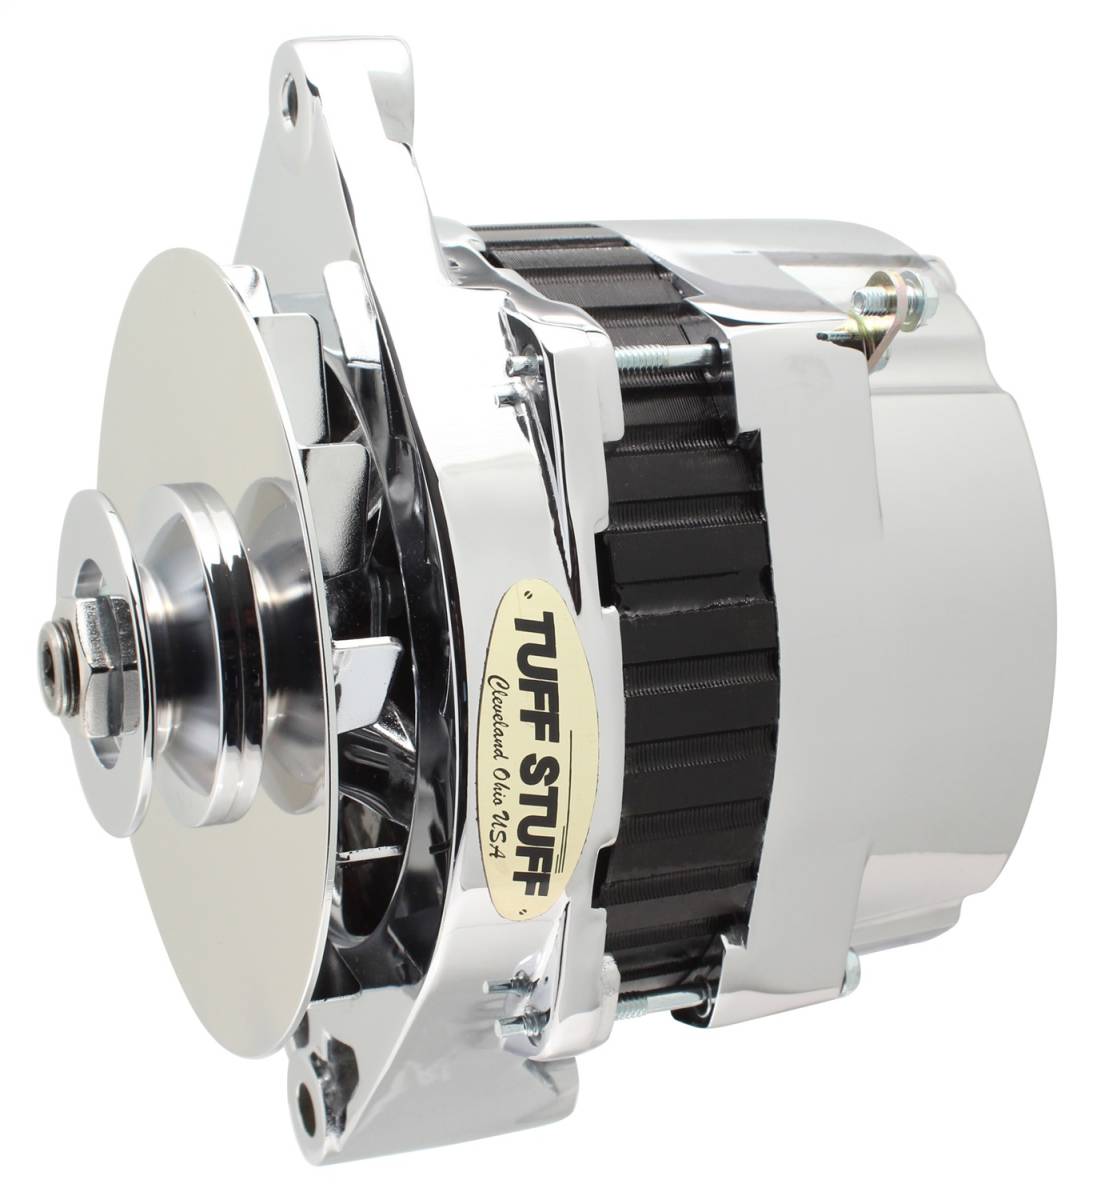 Tuff Stuff Performance - Alternator 250 High AMP Incl. Pigtail/OEM Wiring V Groove Pulley Aluminum Polished 7290NEP